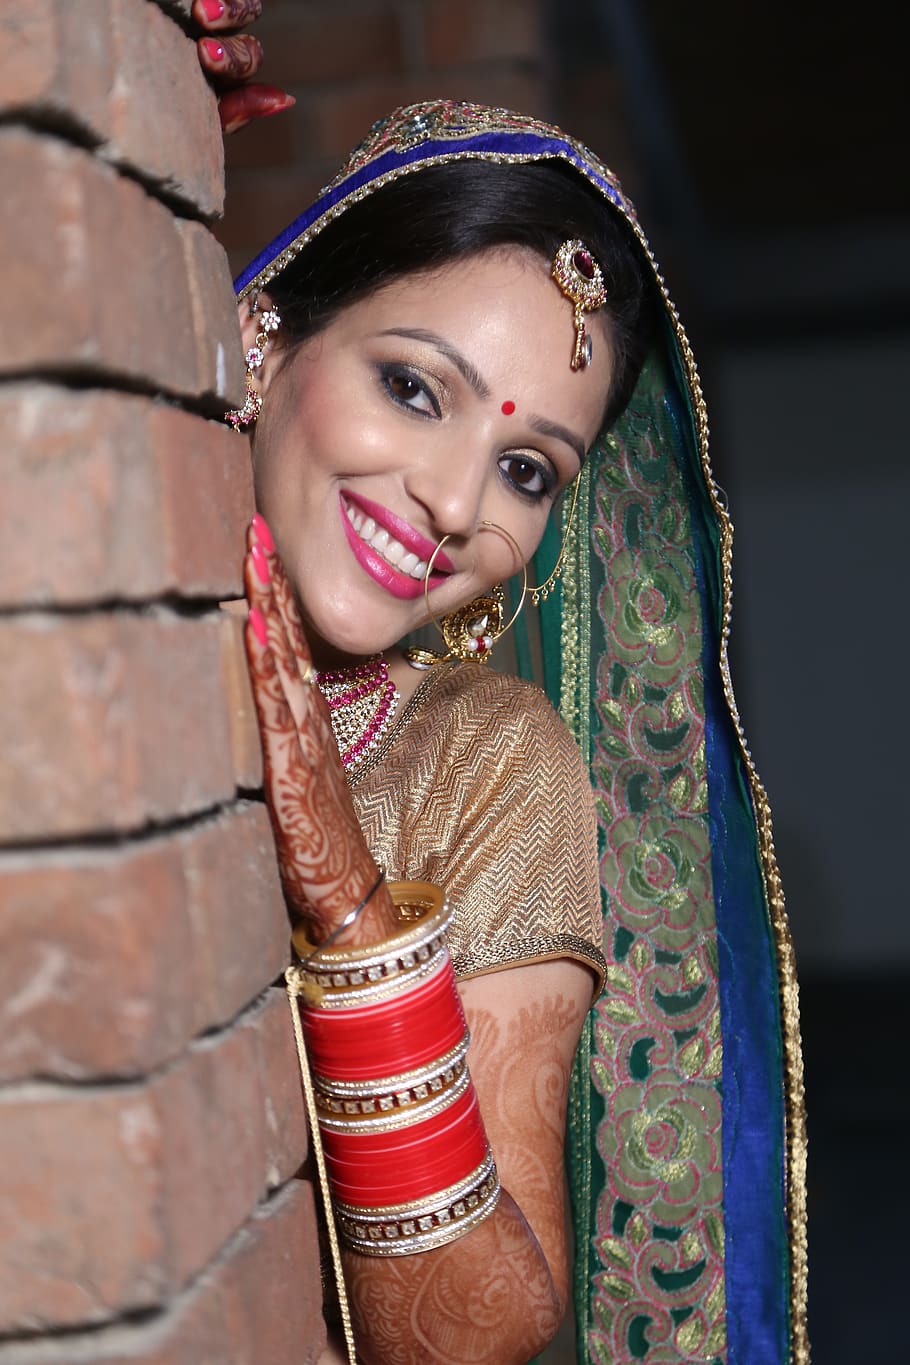 bride, wedding, marriage, indian, traditional clothing, smiling, young adult, portrait, one person, looking at camera